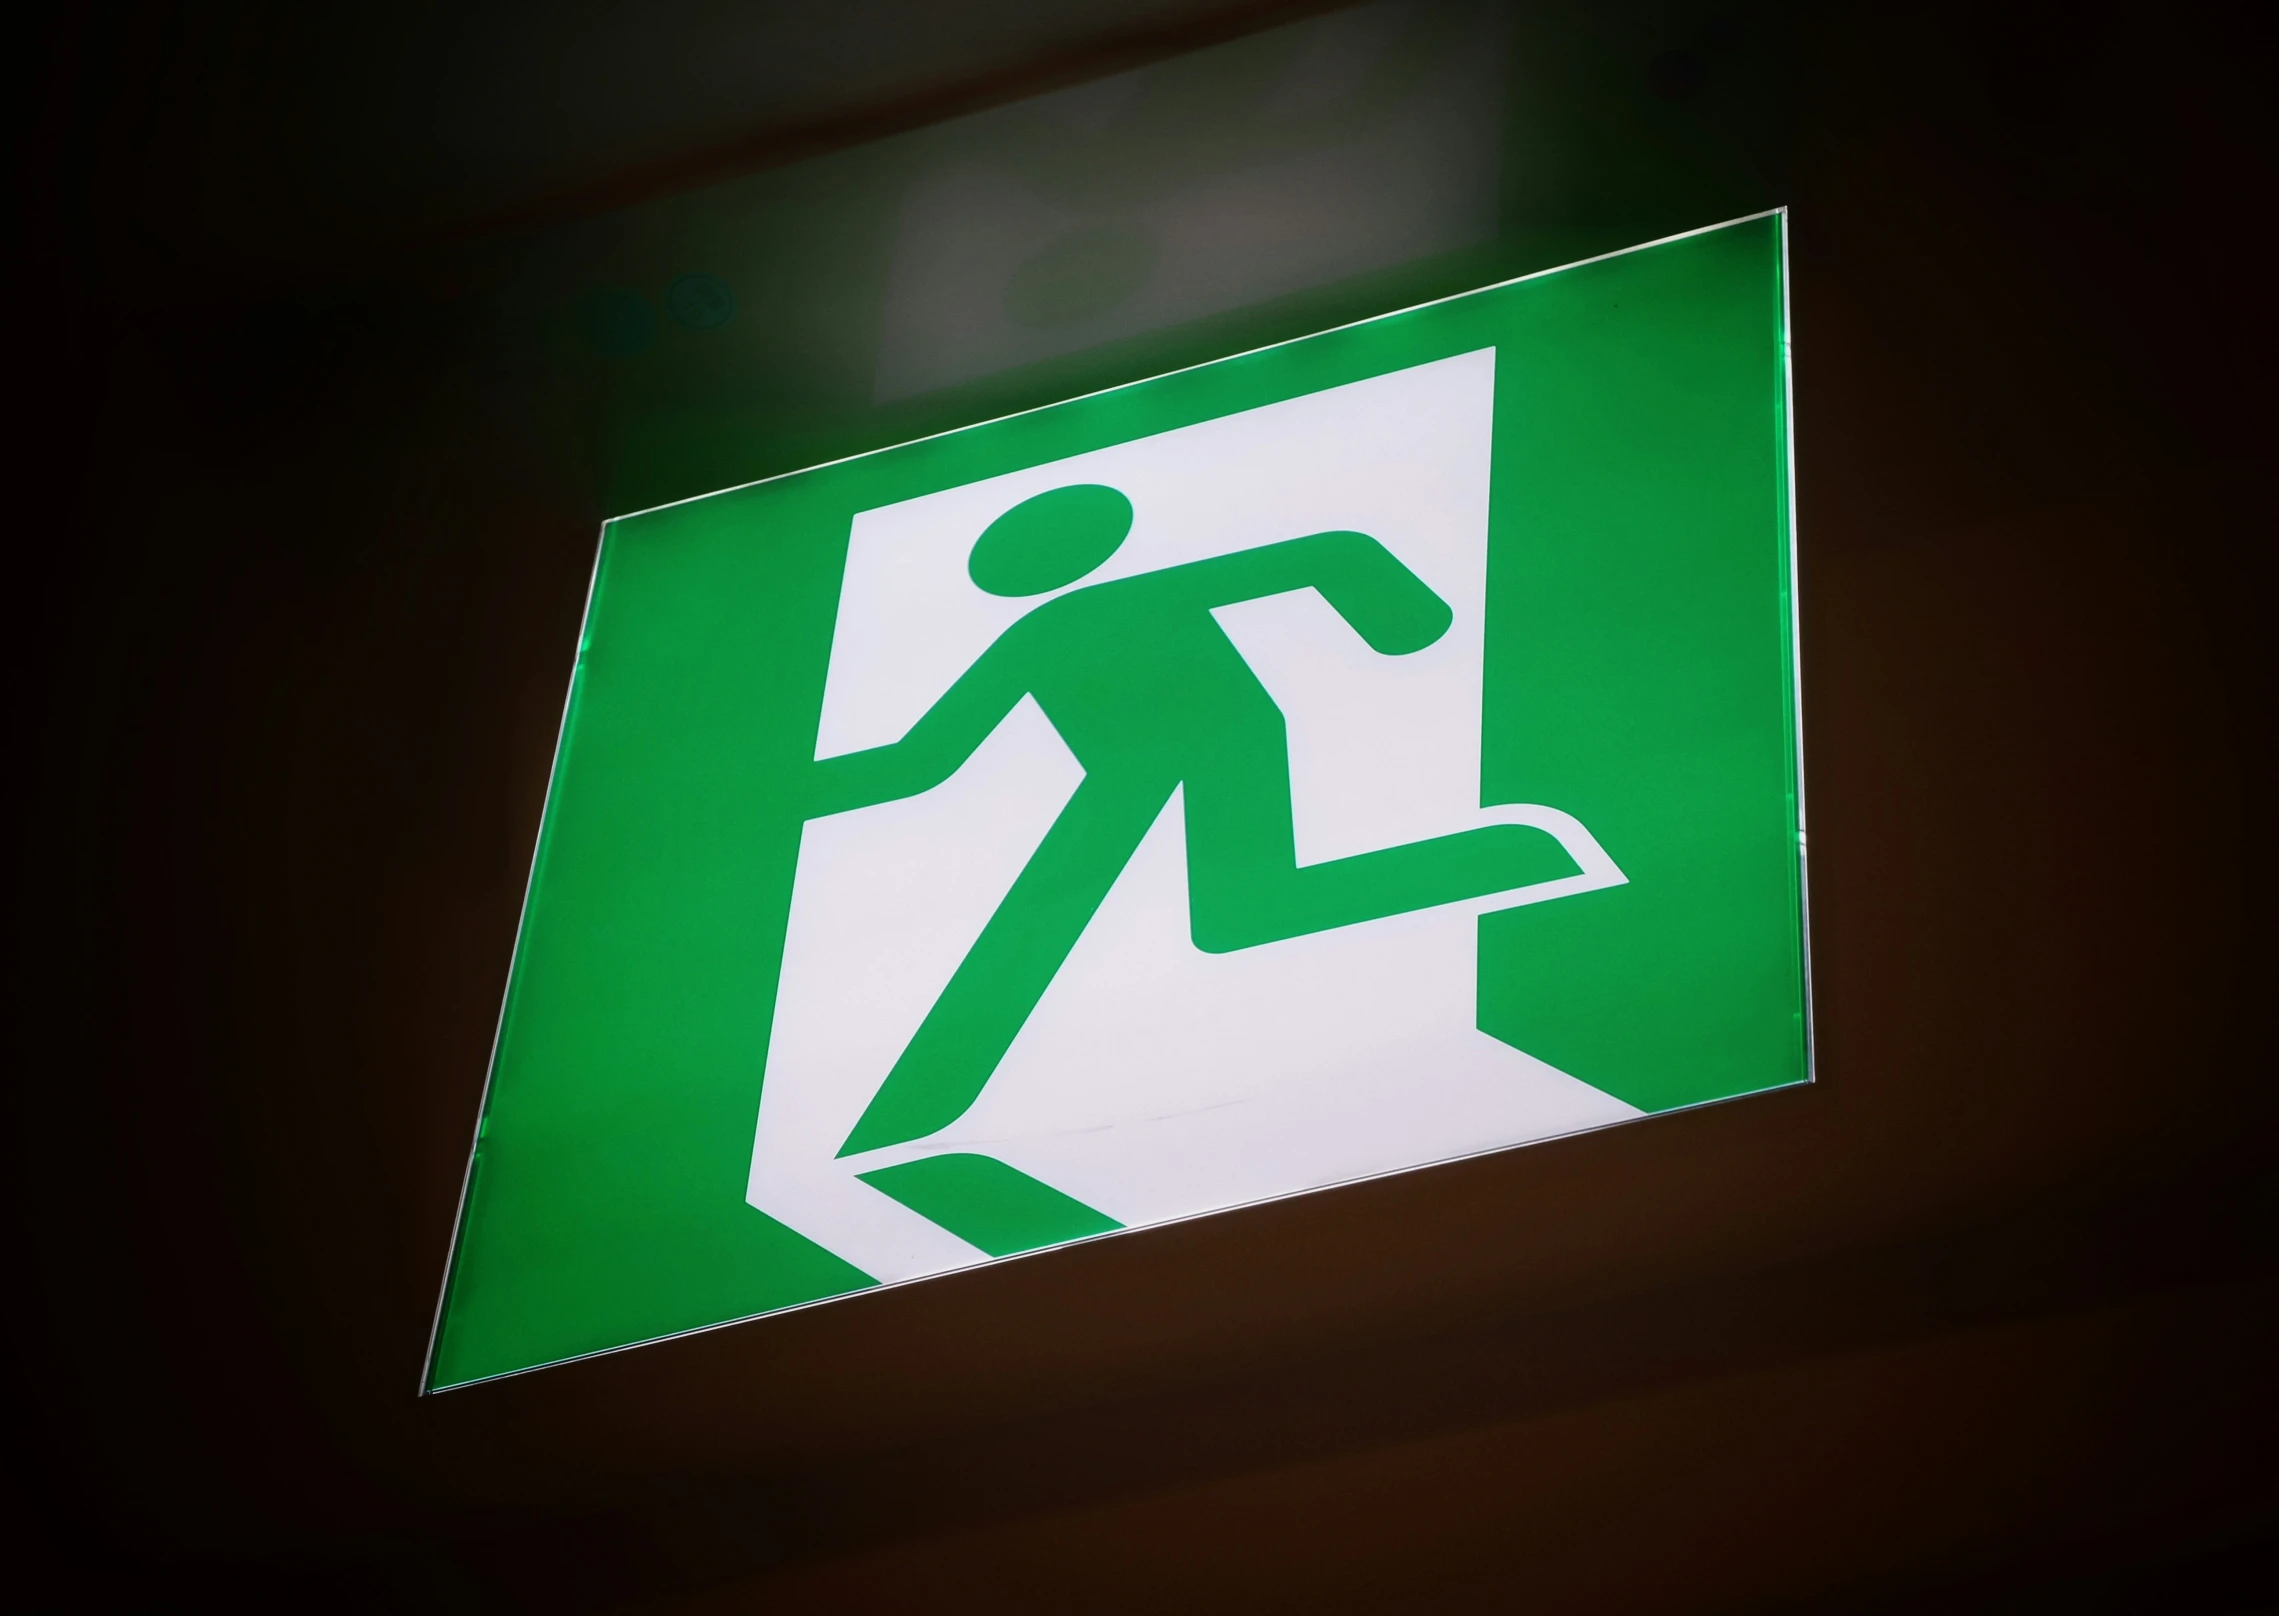 the sign has the man running to the emergency exit